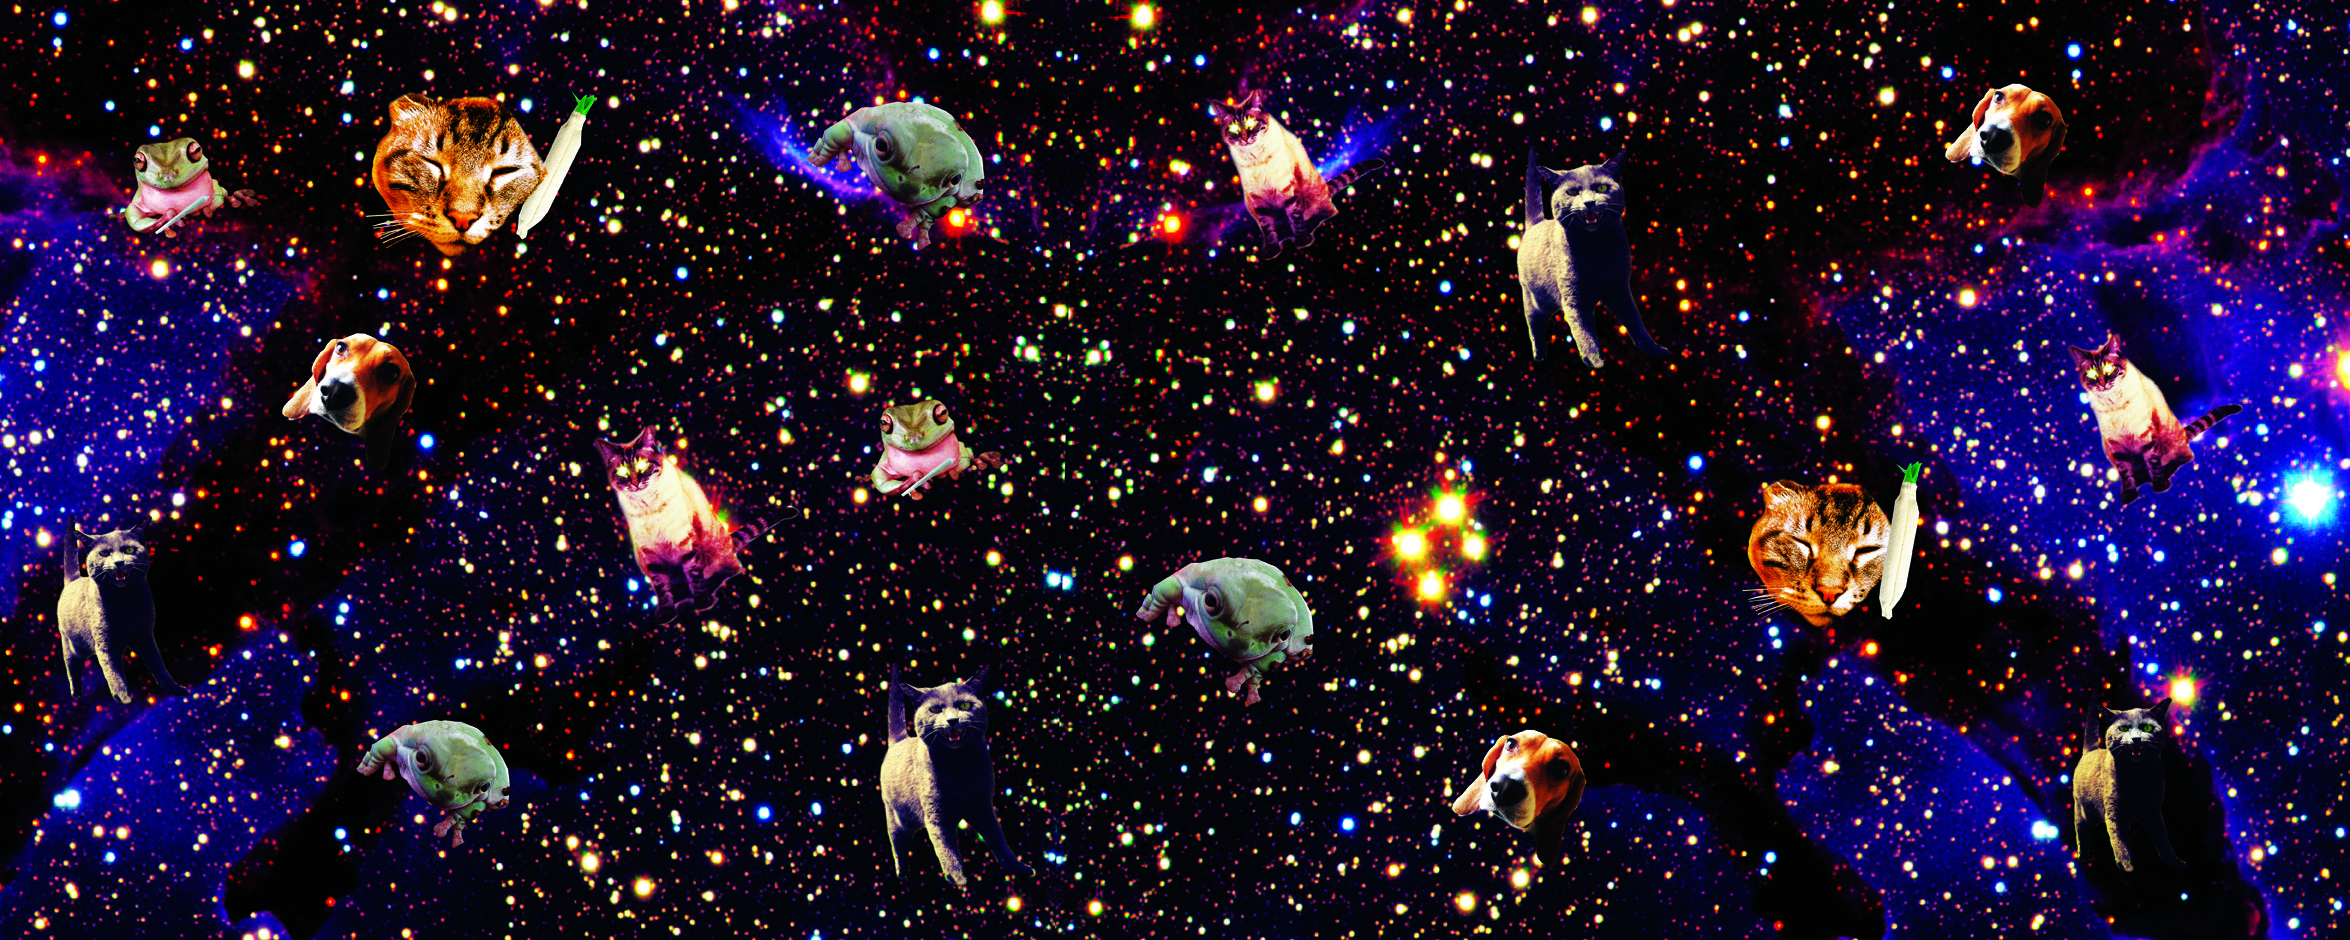 Free download kitty babe in space cat graphic wallpaper Footprint Insole [2350x940] for your Desktop, Mobile & Tablet. Explore Space Kitty Wallpaper. Space Cats HD Wallpaper, Space Desktop Wallpaper HD